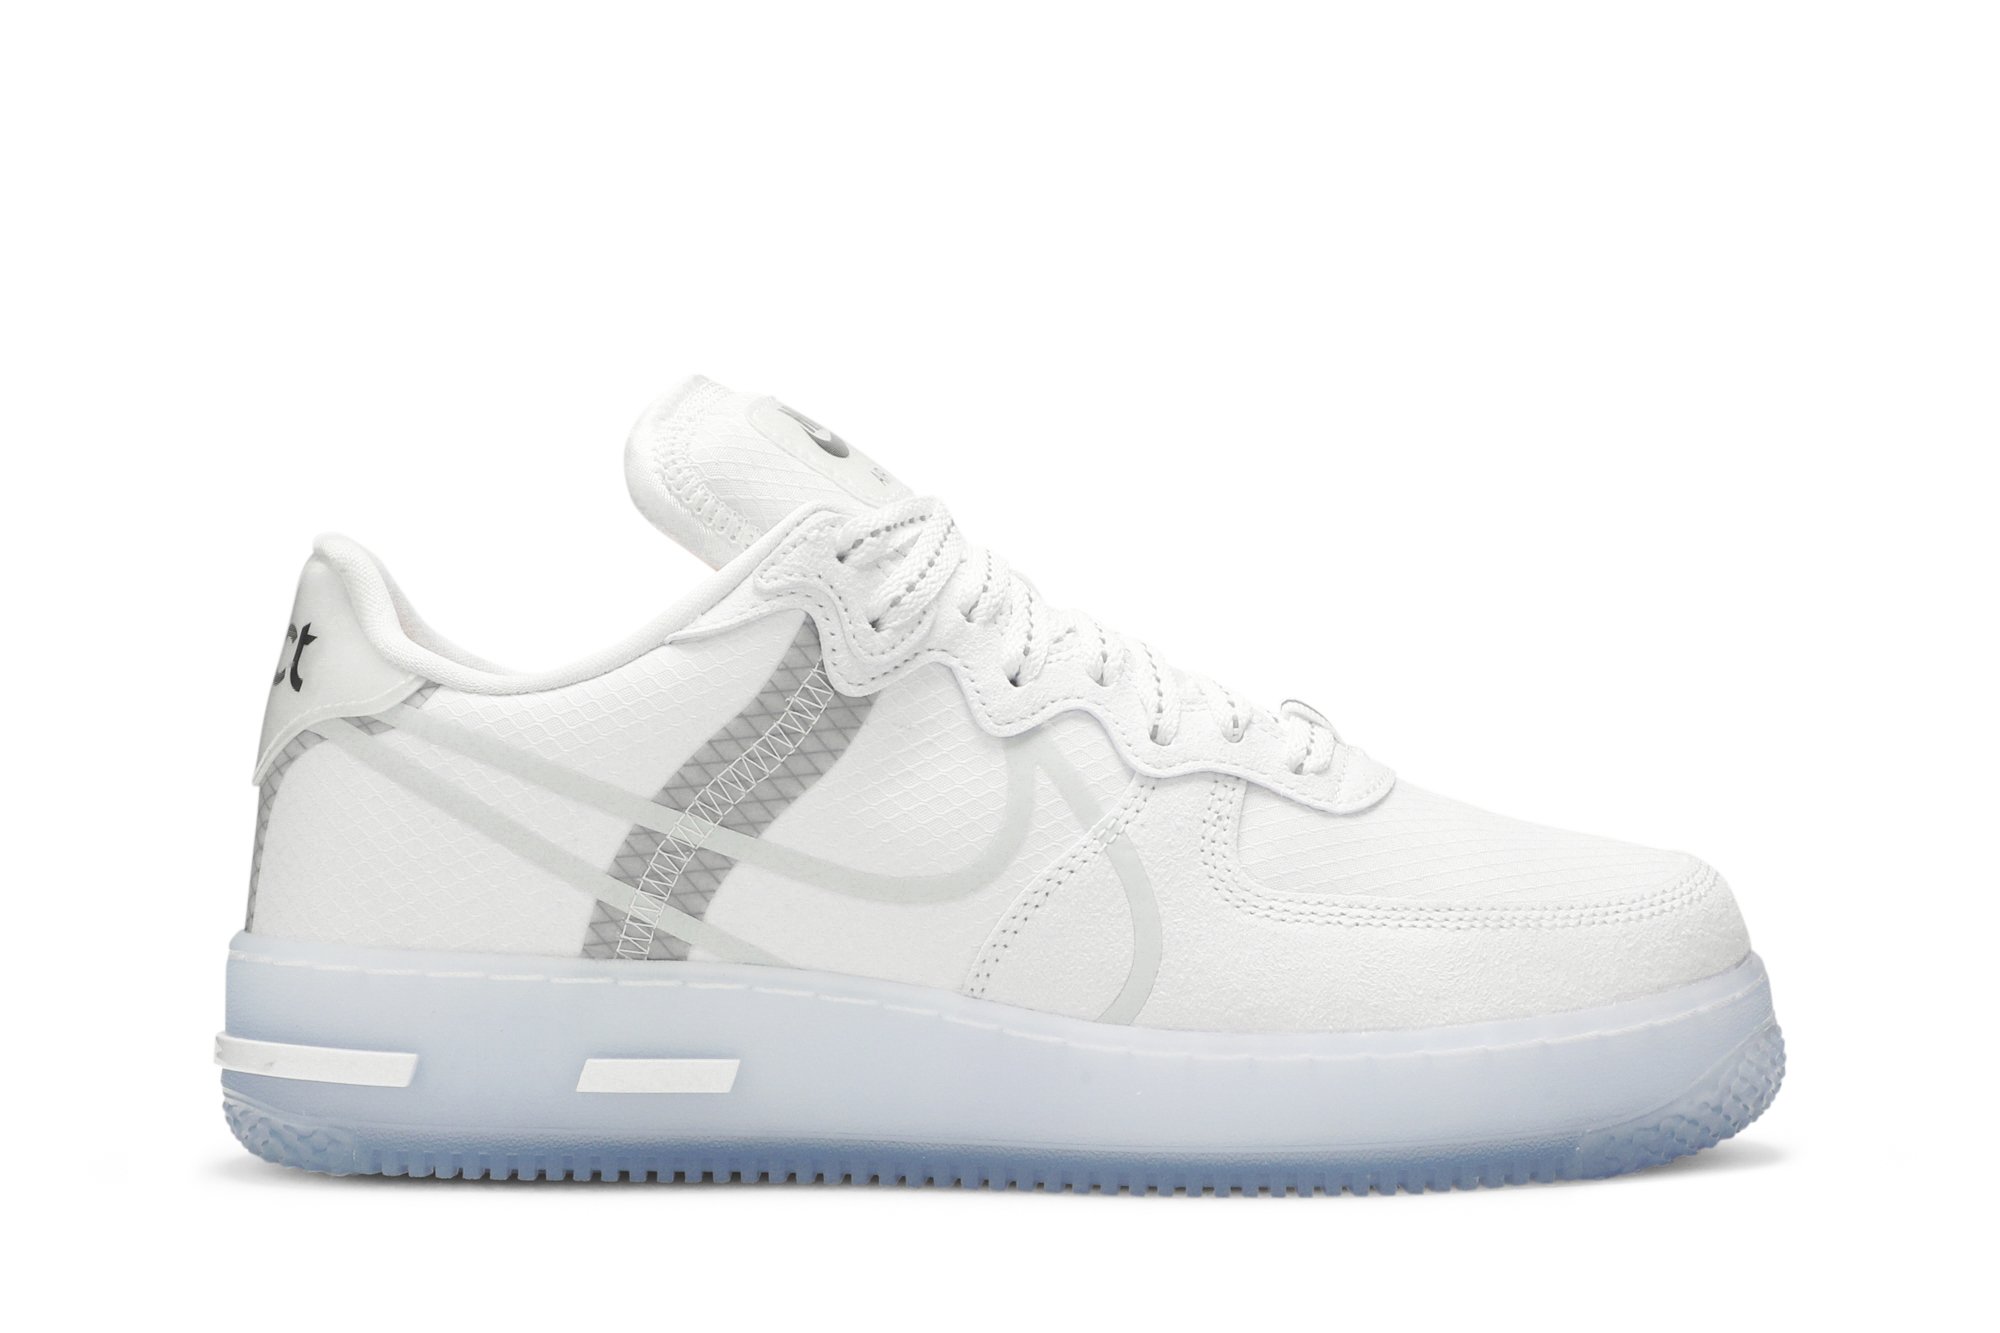 Buy Air Force 1 React QS 'White Ice' - CQ8879 100 | GOAT